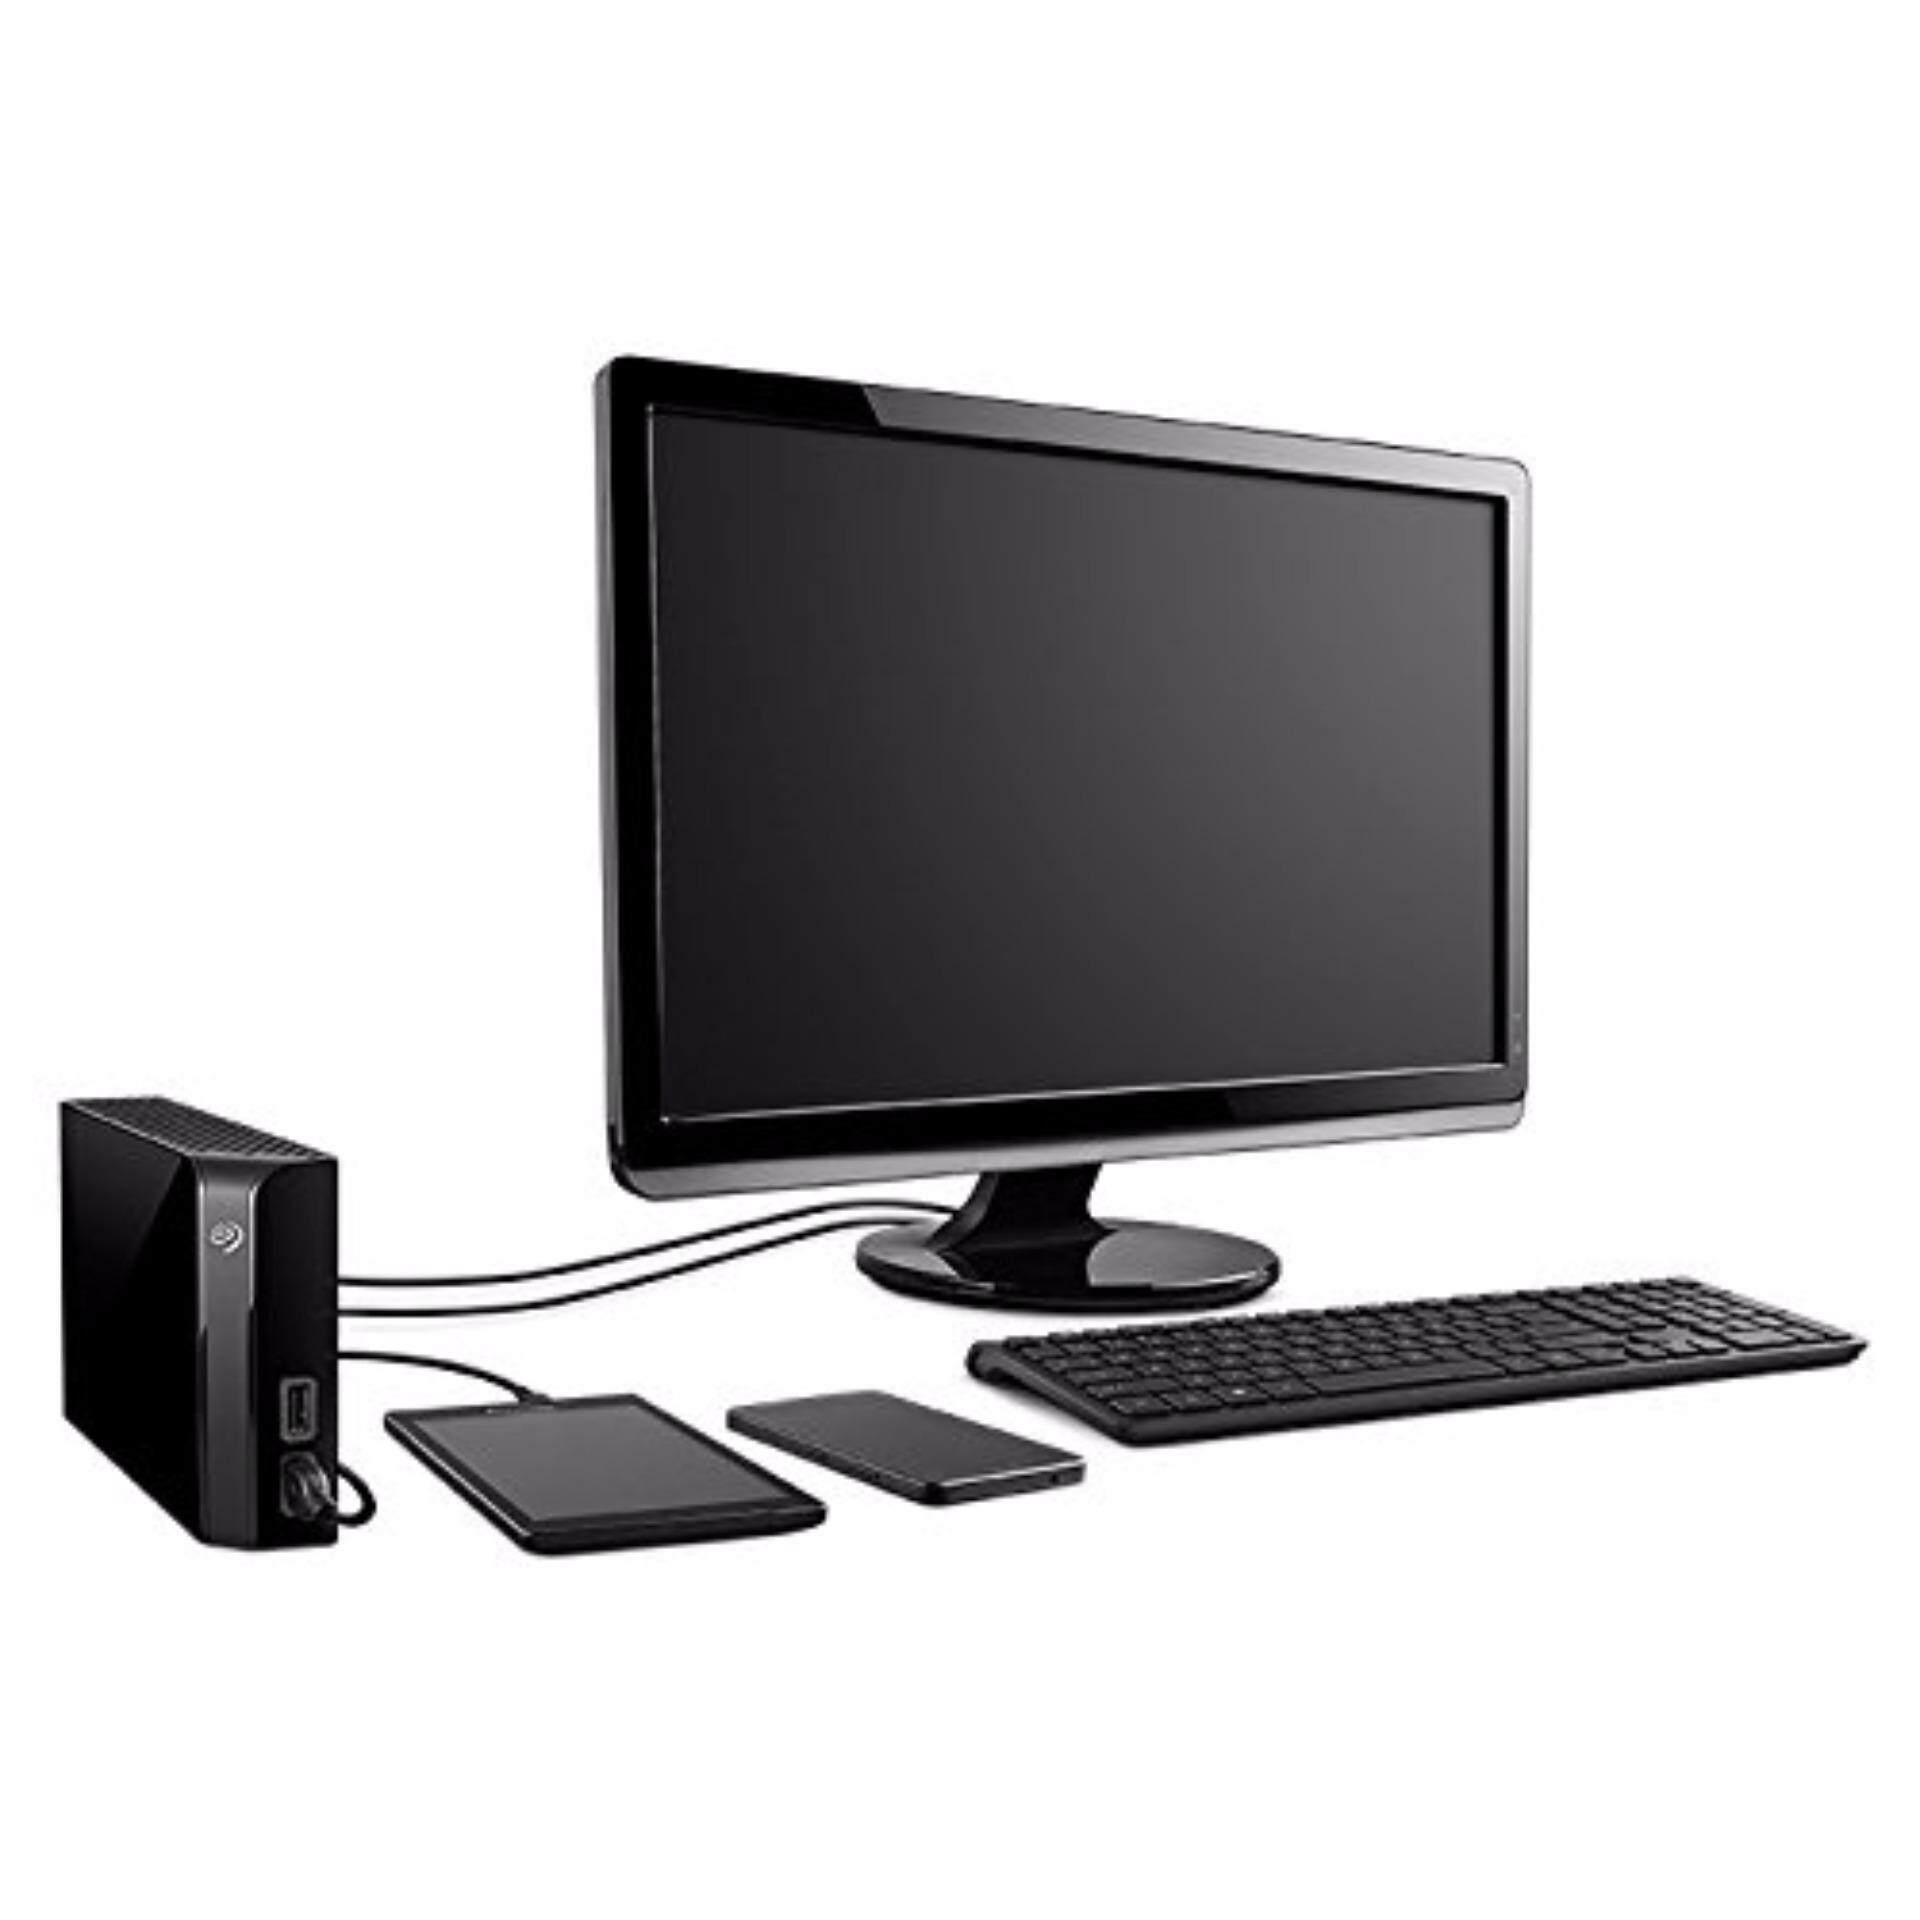 Seagate Backup Plus Desktop Hub 8TB (Up to 160 MB/s) with Integrated USB 3.0 Back up & Charge Hub Downloadable Seagate Backup Software Mac & Windows Compatible external hard disk